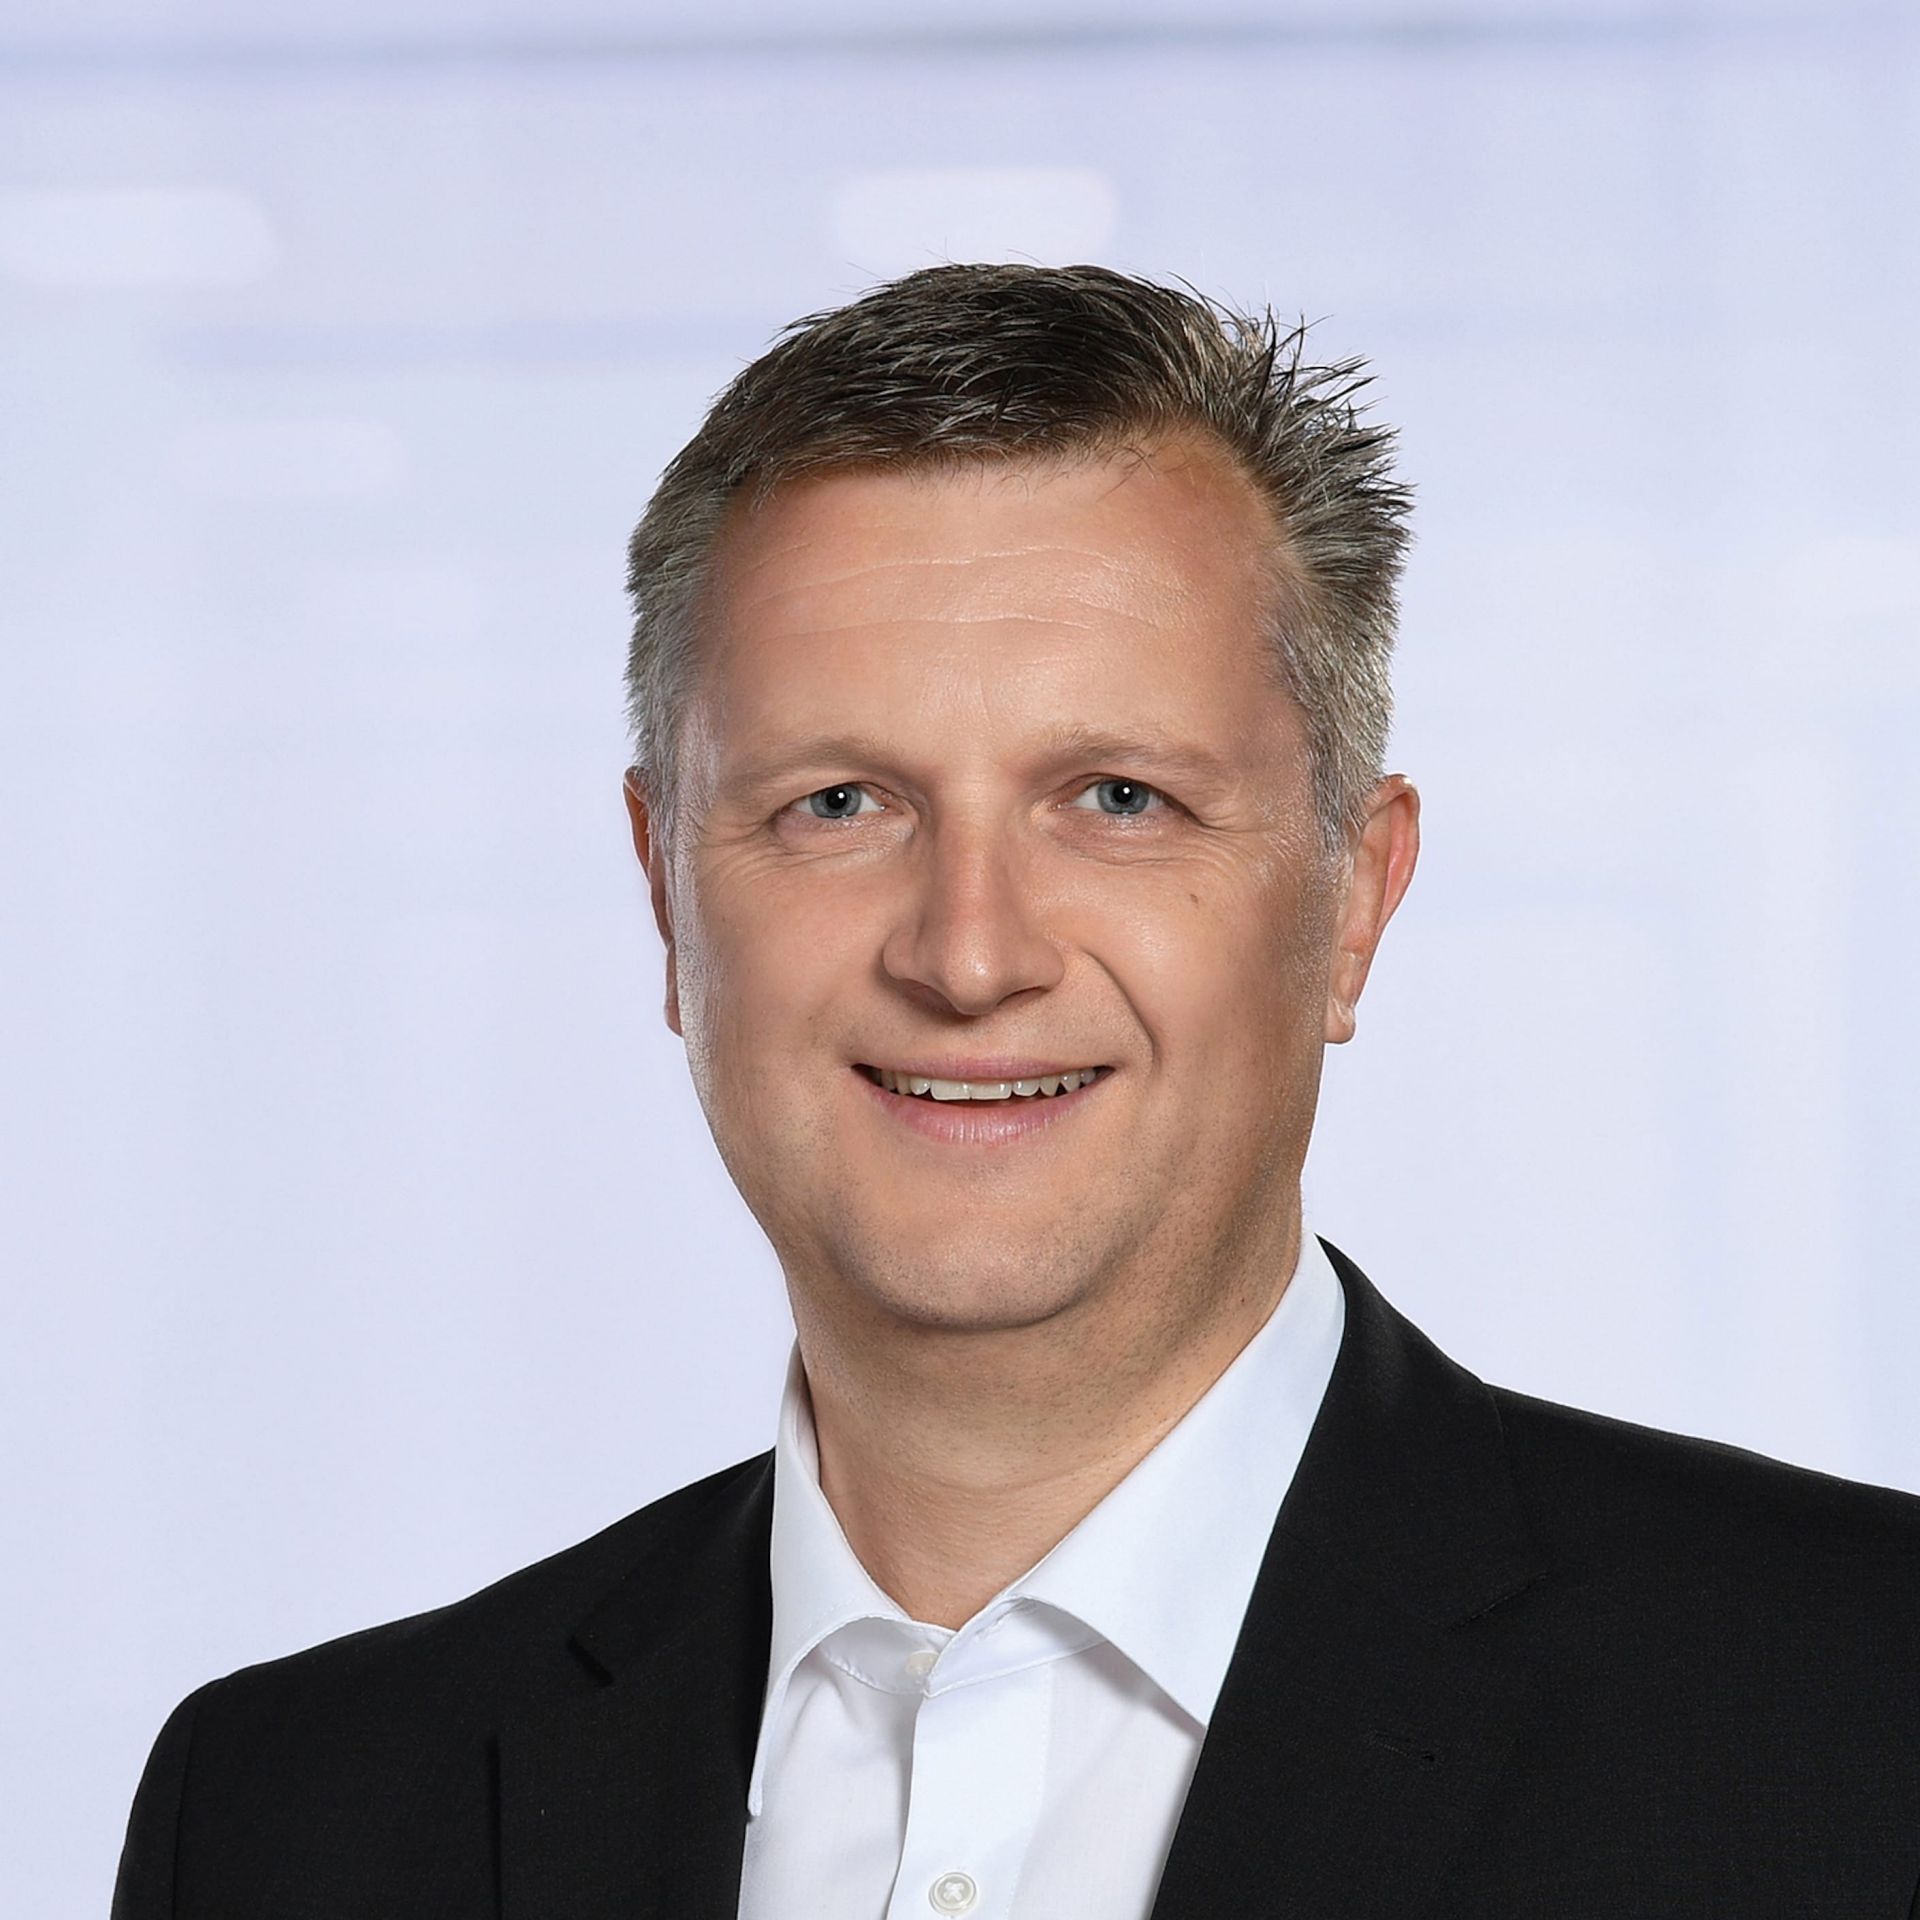 **Christoph Grieser**
Head of Global Software Sales
ZEISS Industrial Quality Solutions